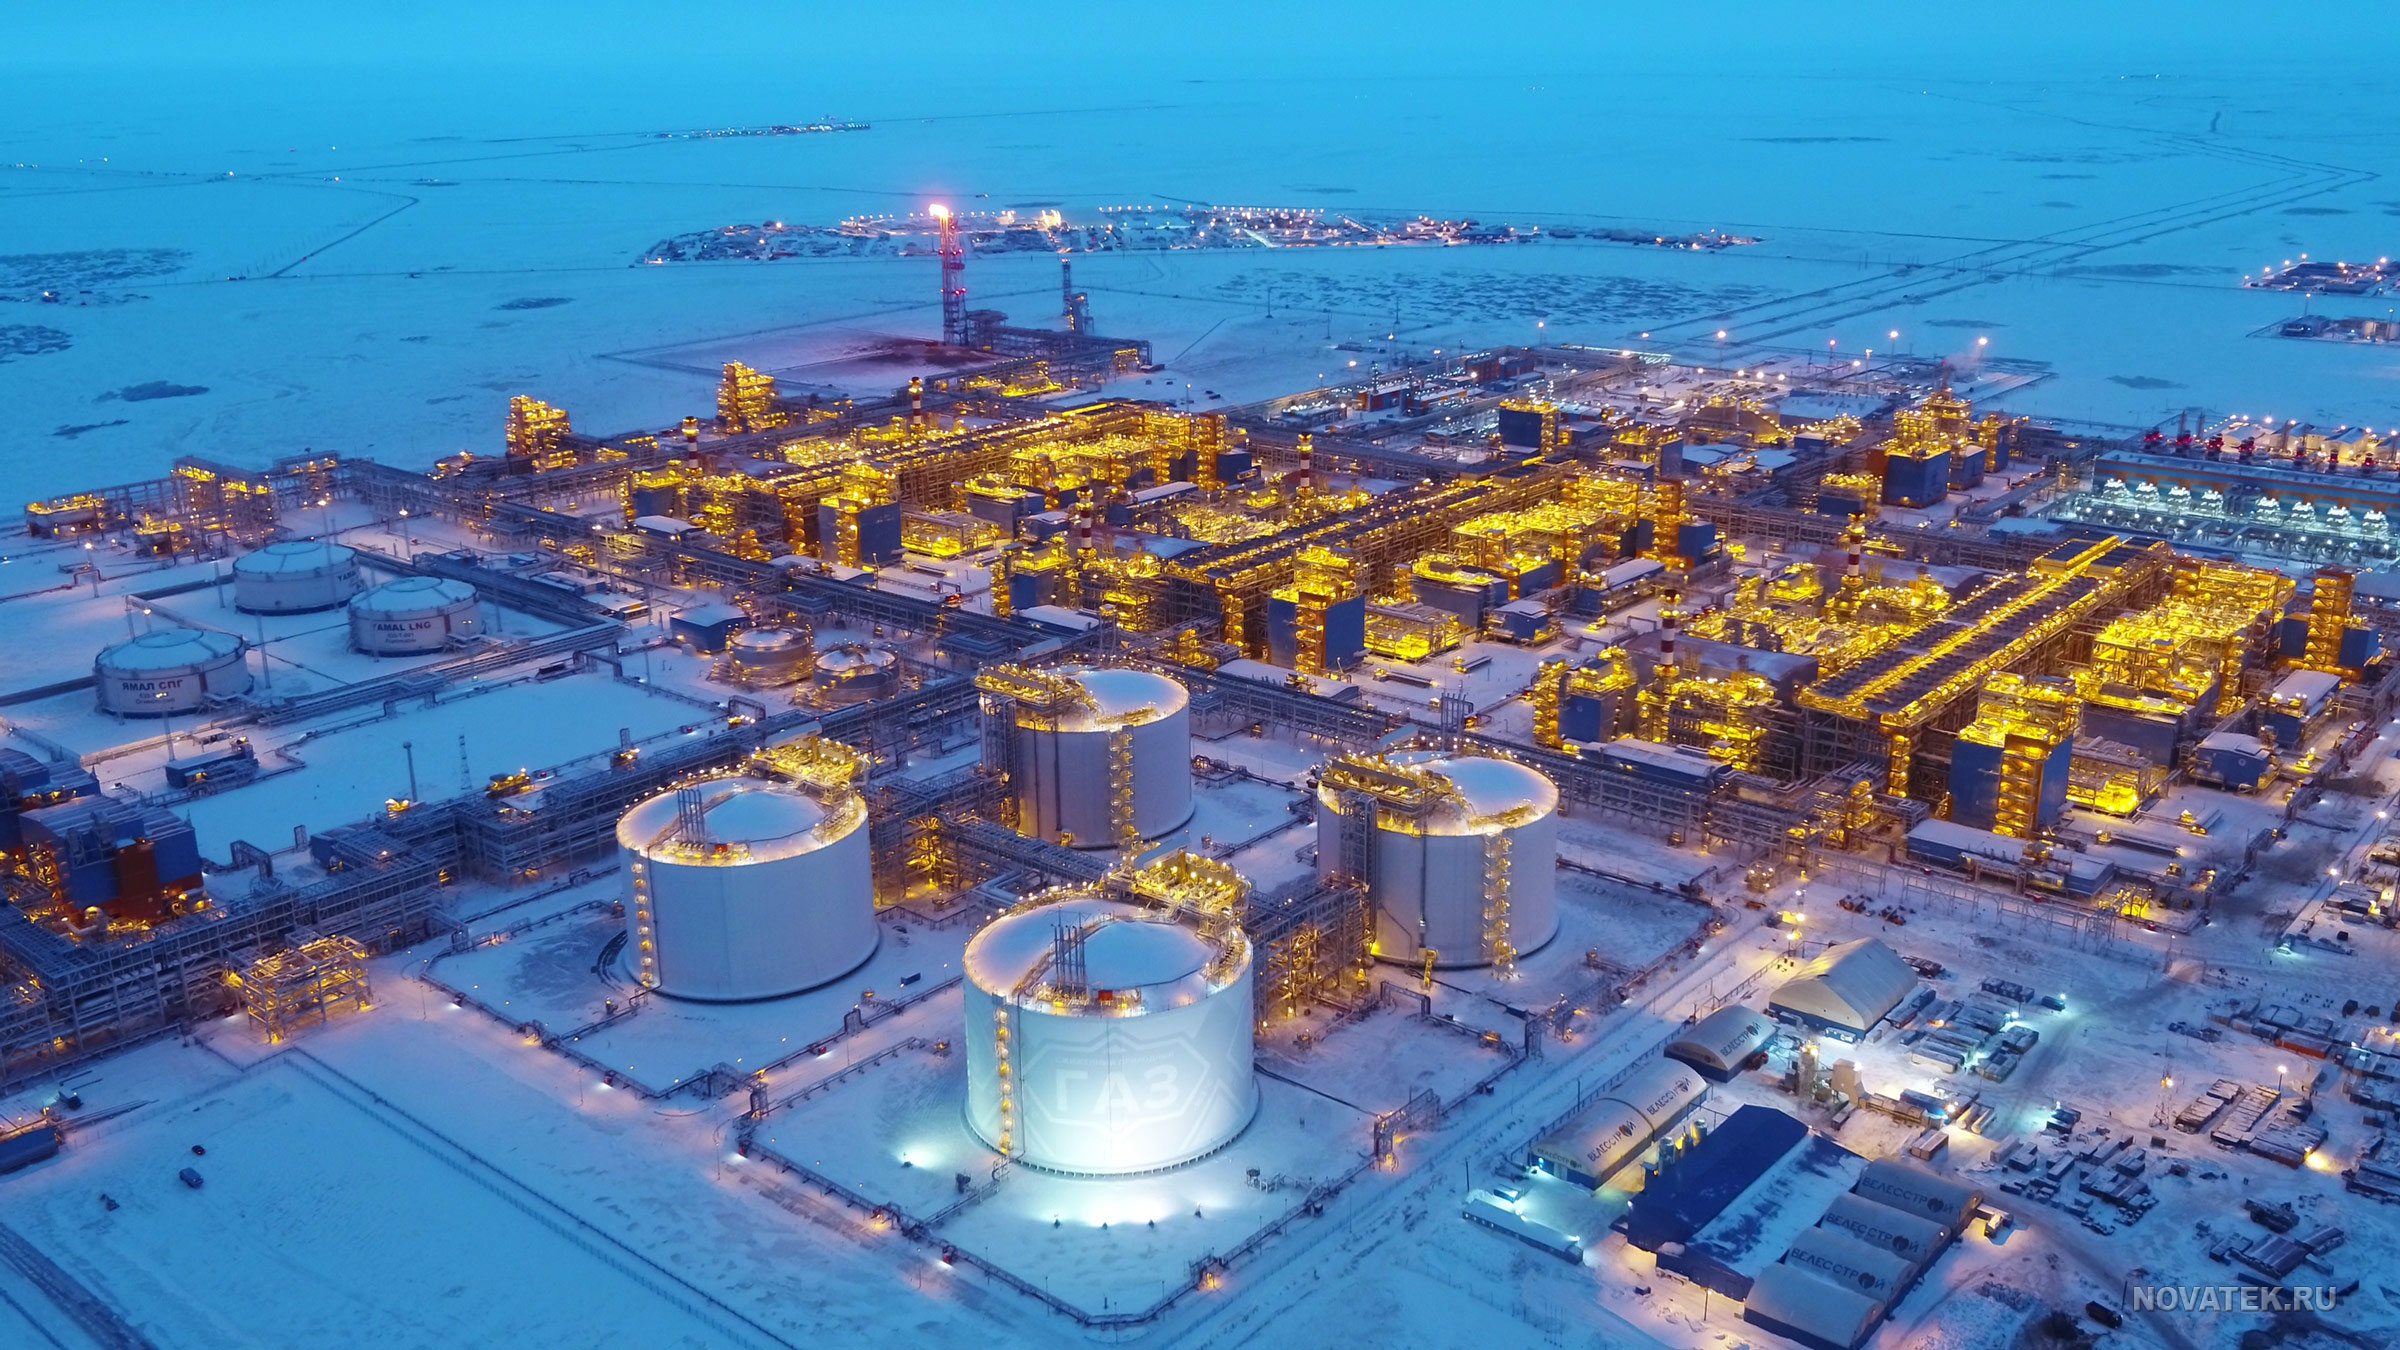 in-push-for-global-lead-in-lng-moscow-takes-aim-on-arctic-tundra